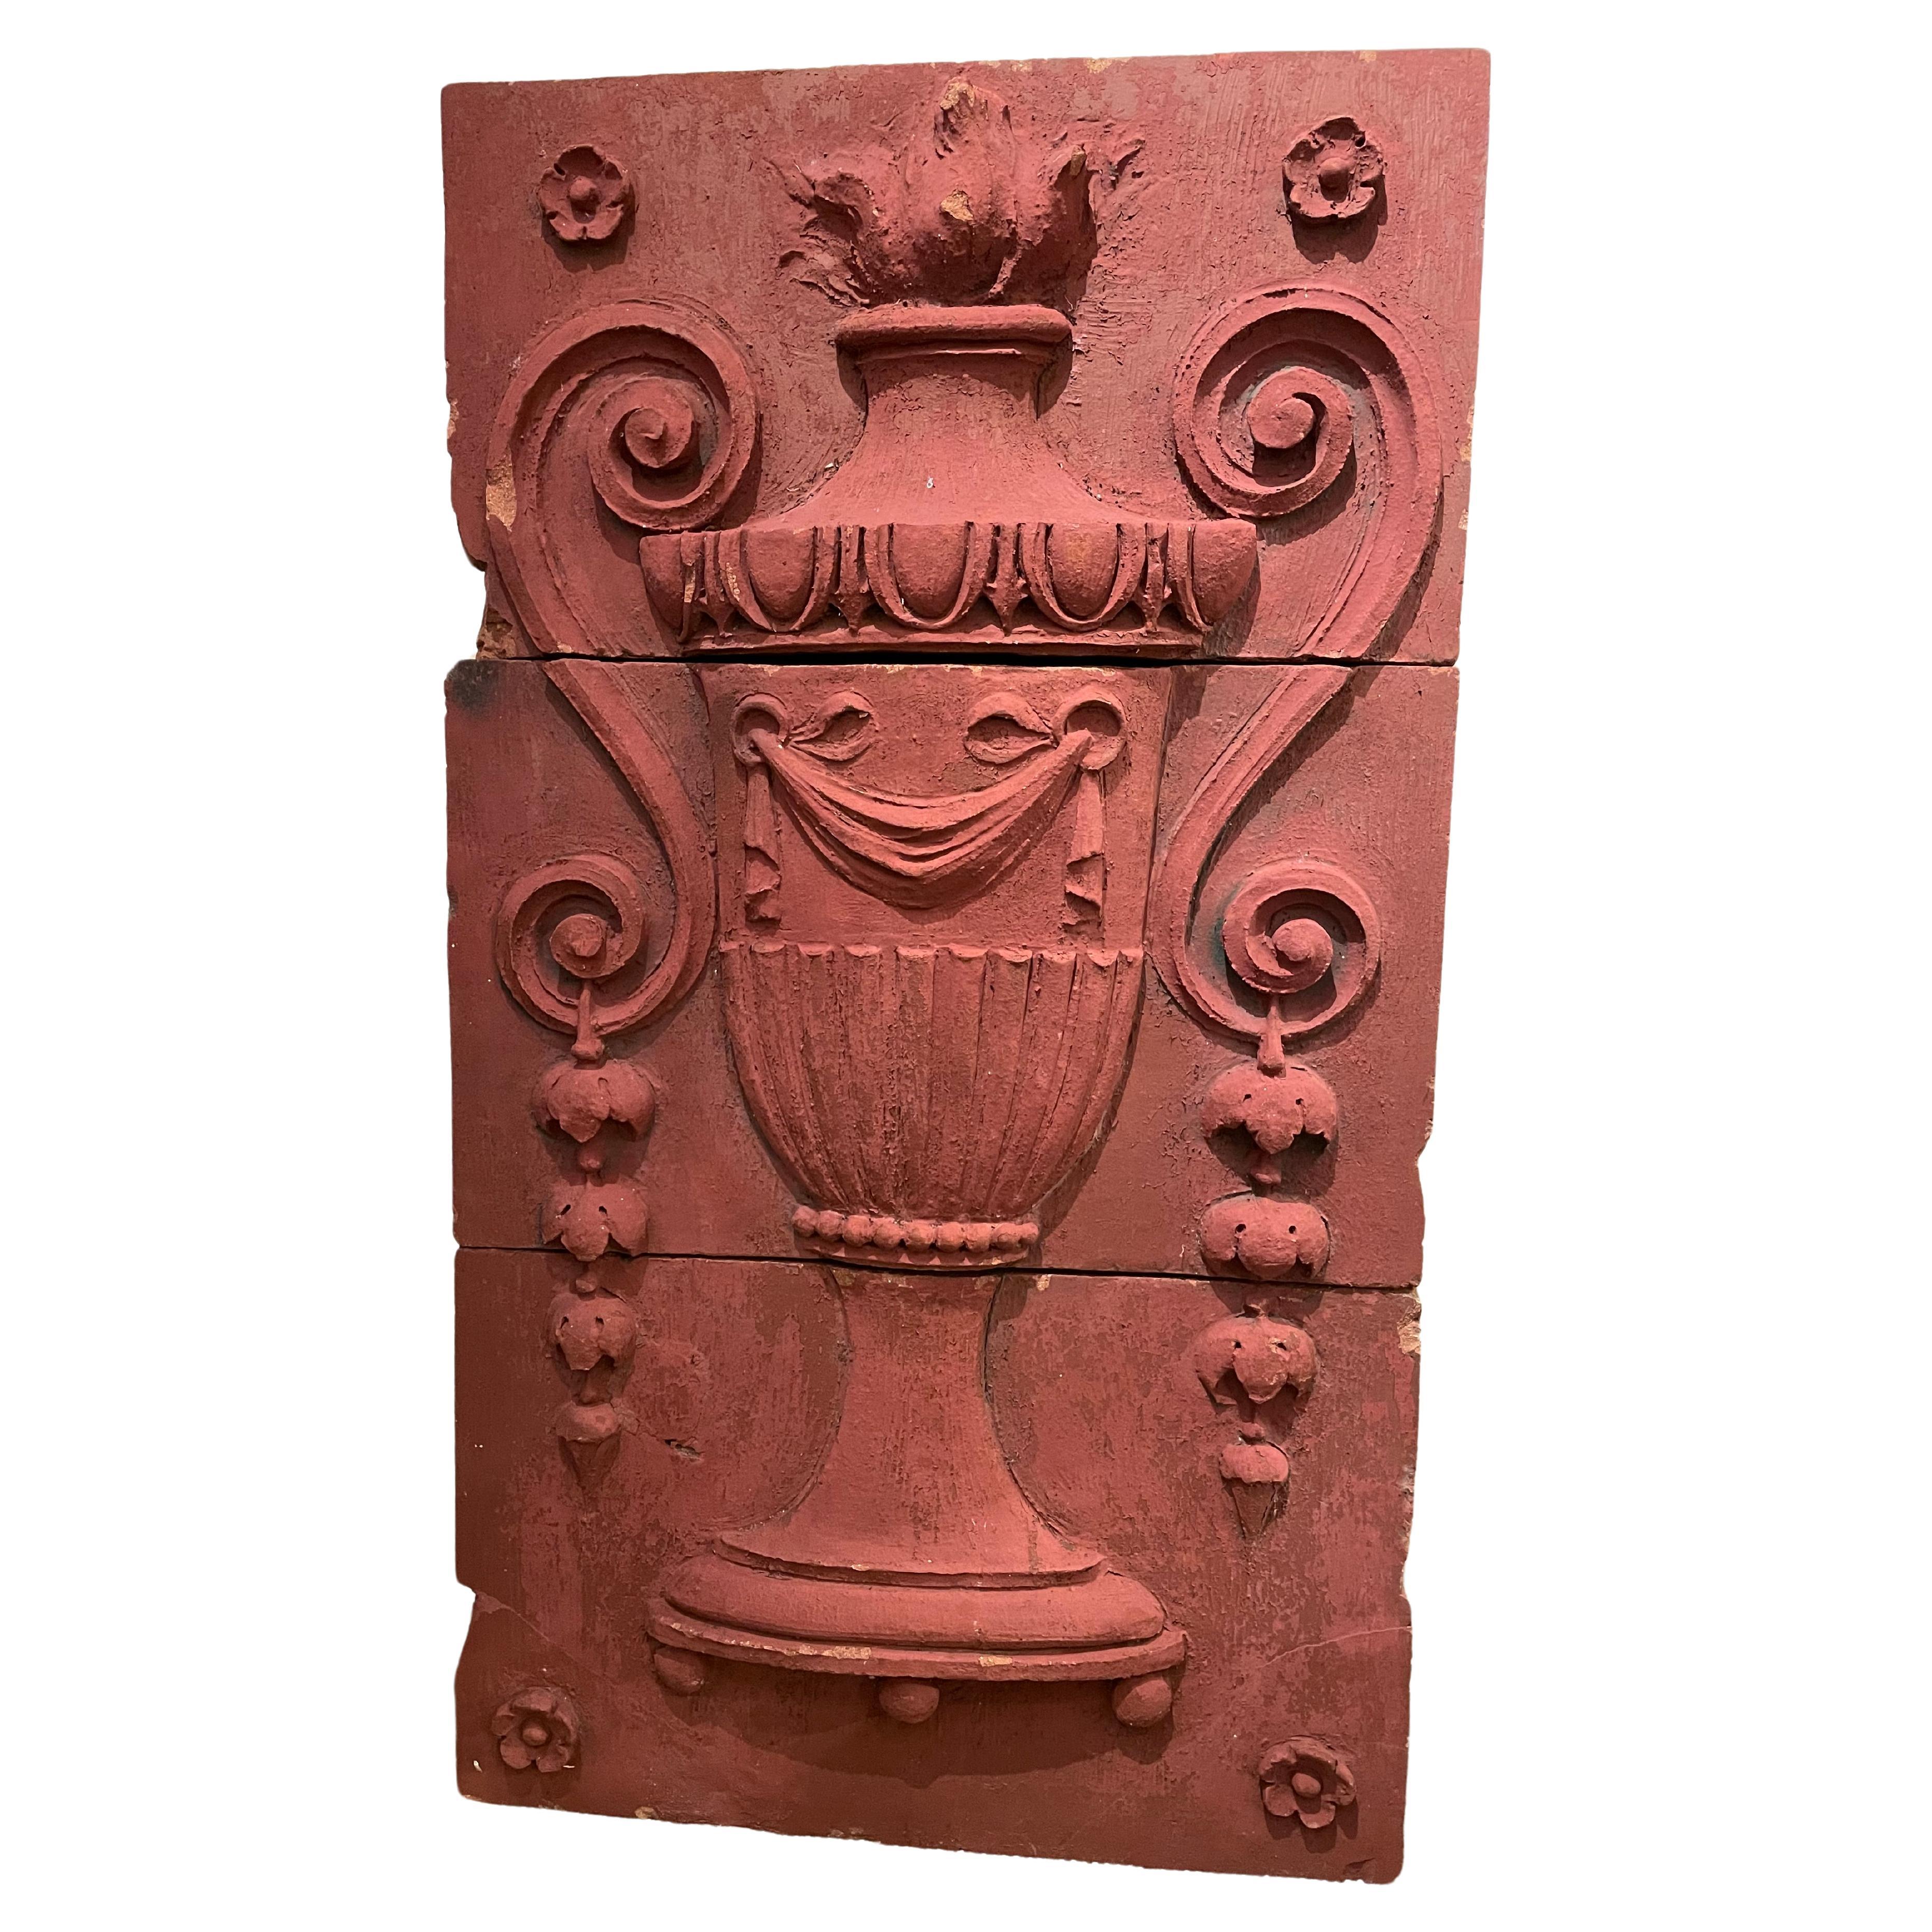 Monumental 19th Century Neoclassical Terracotta Urn Architectural Relief For Sale